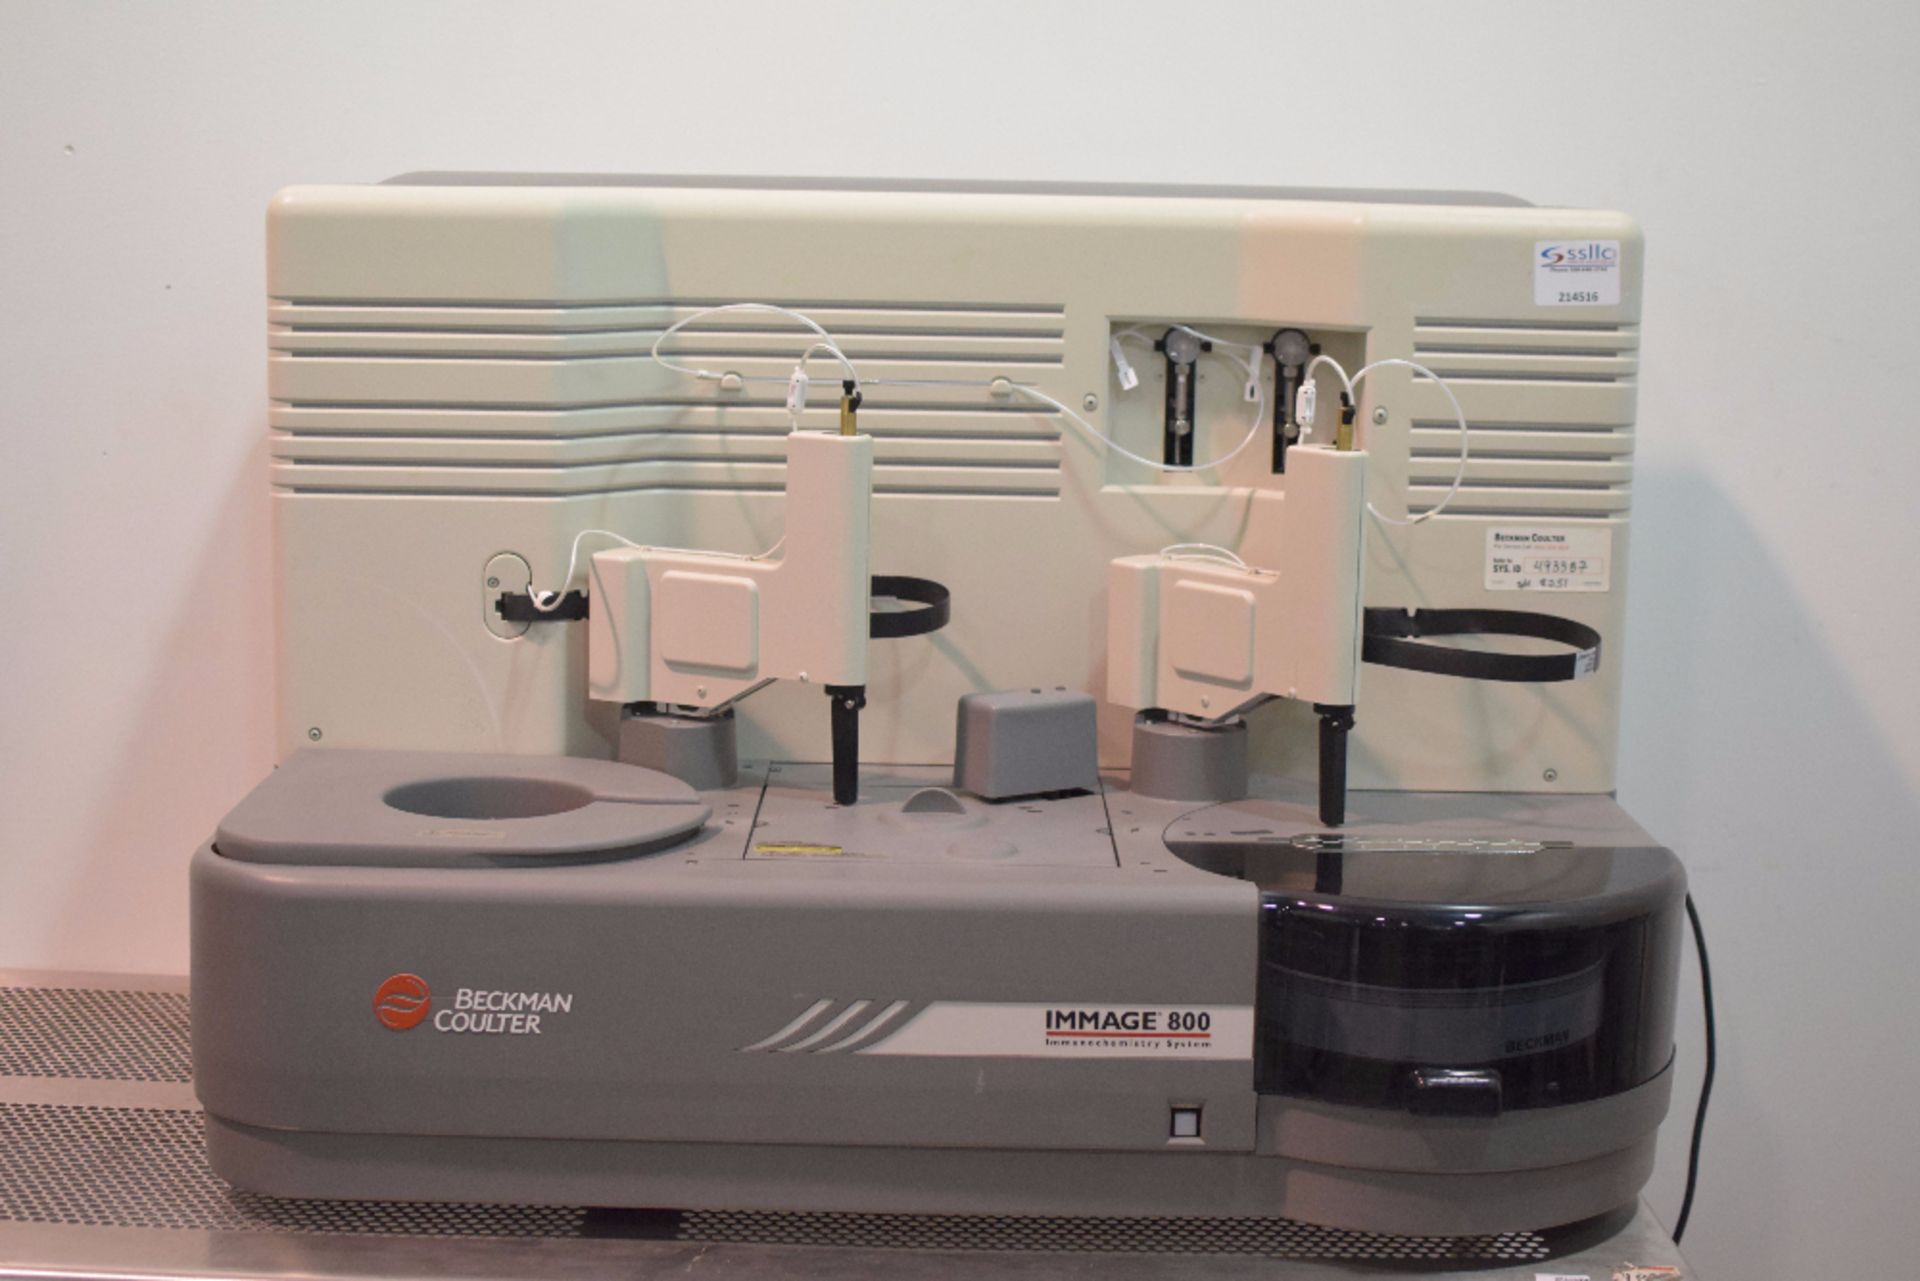 Beckman Coulter Immage 800 Immunochemistry System